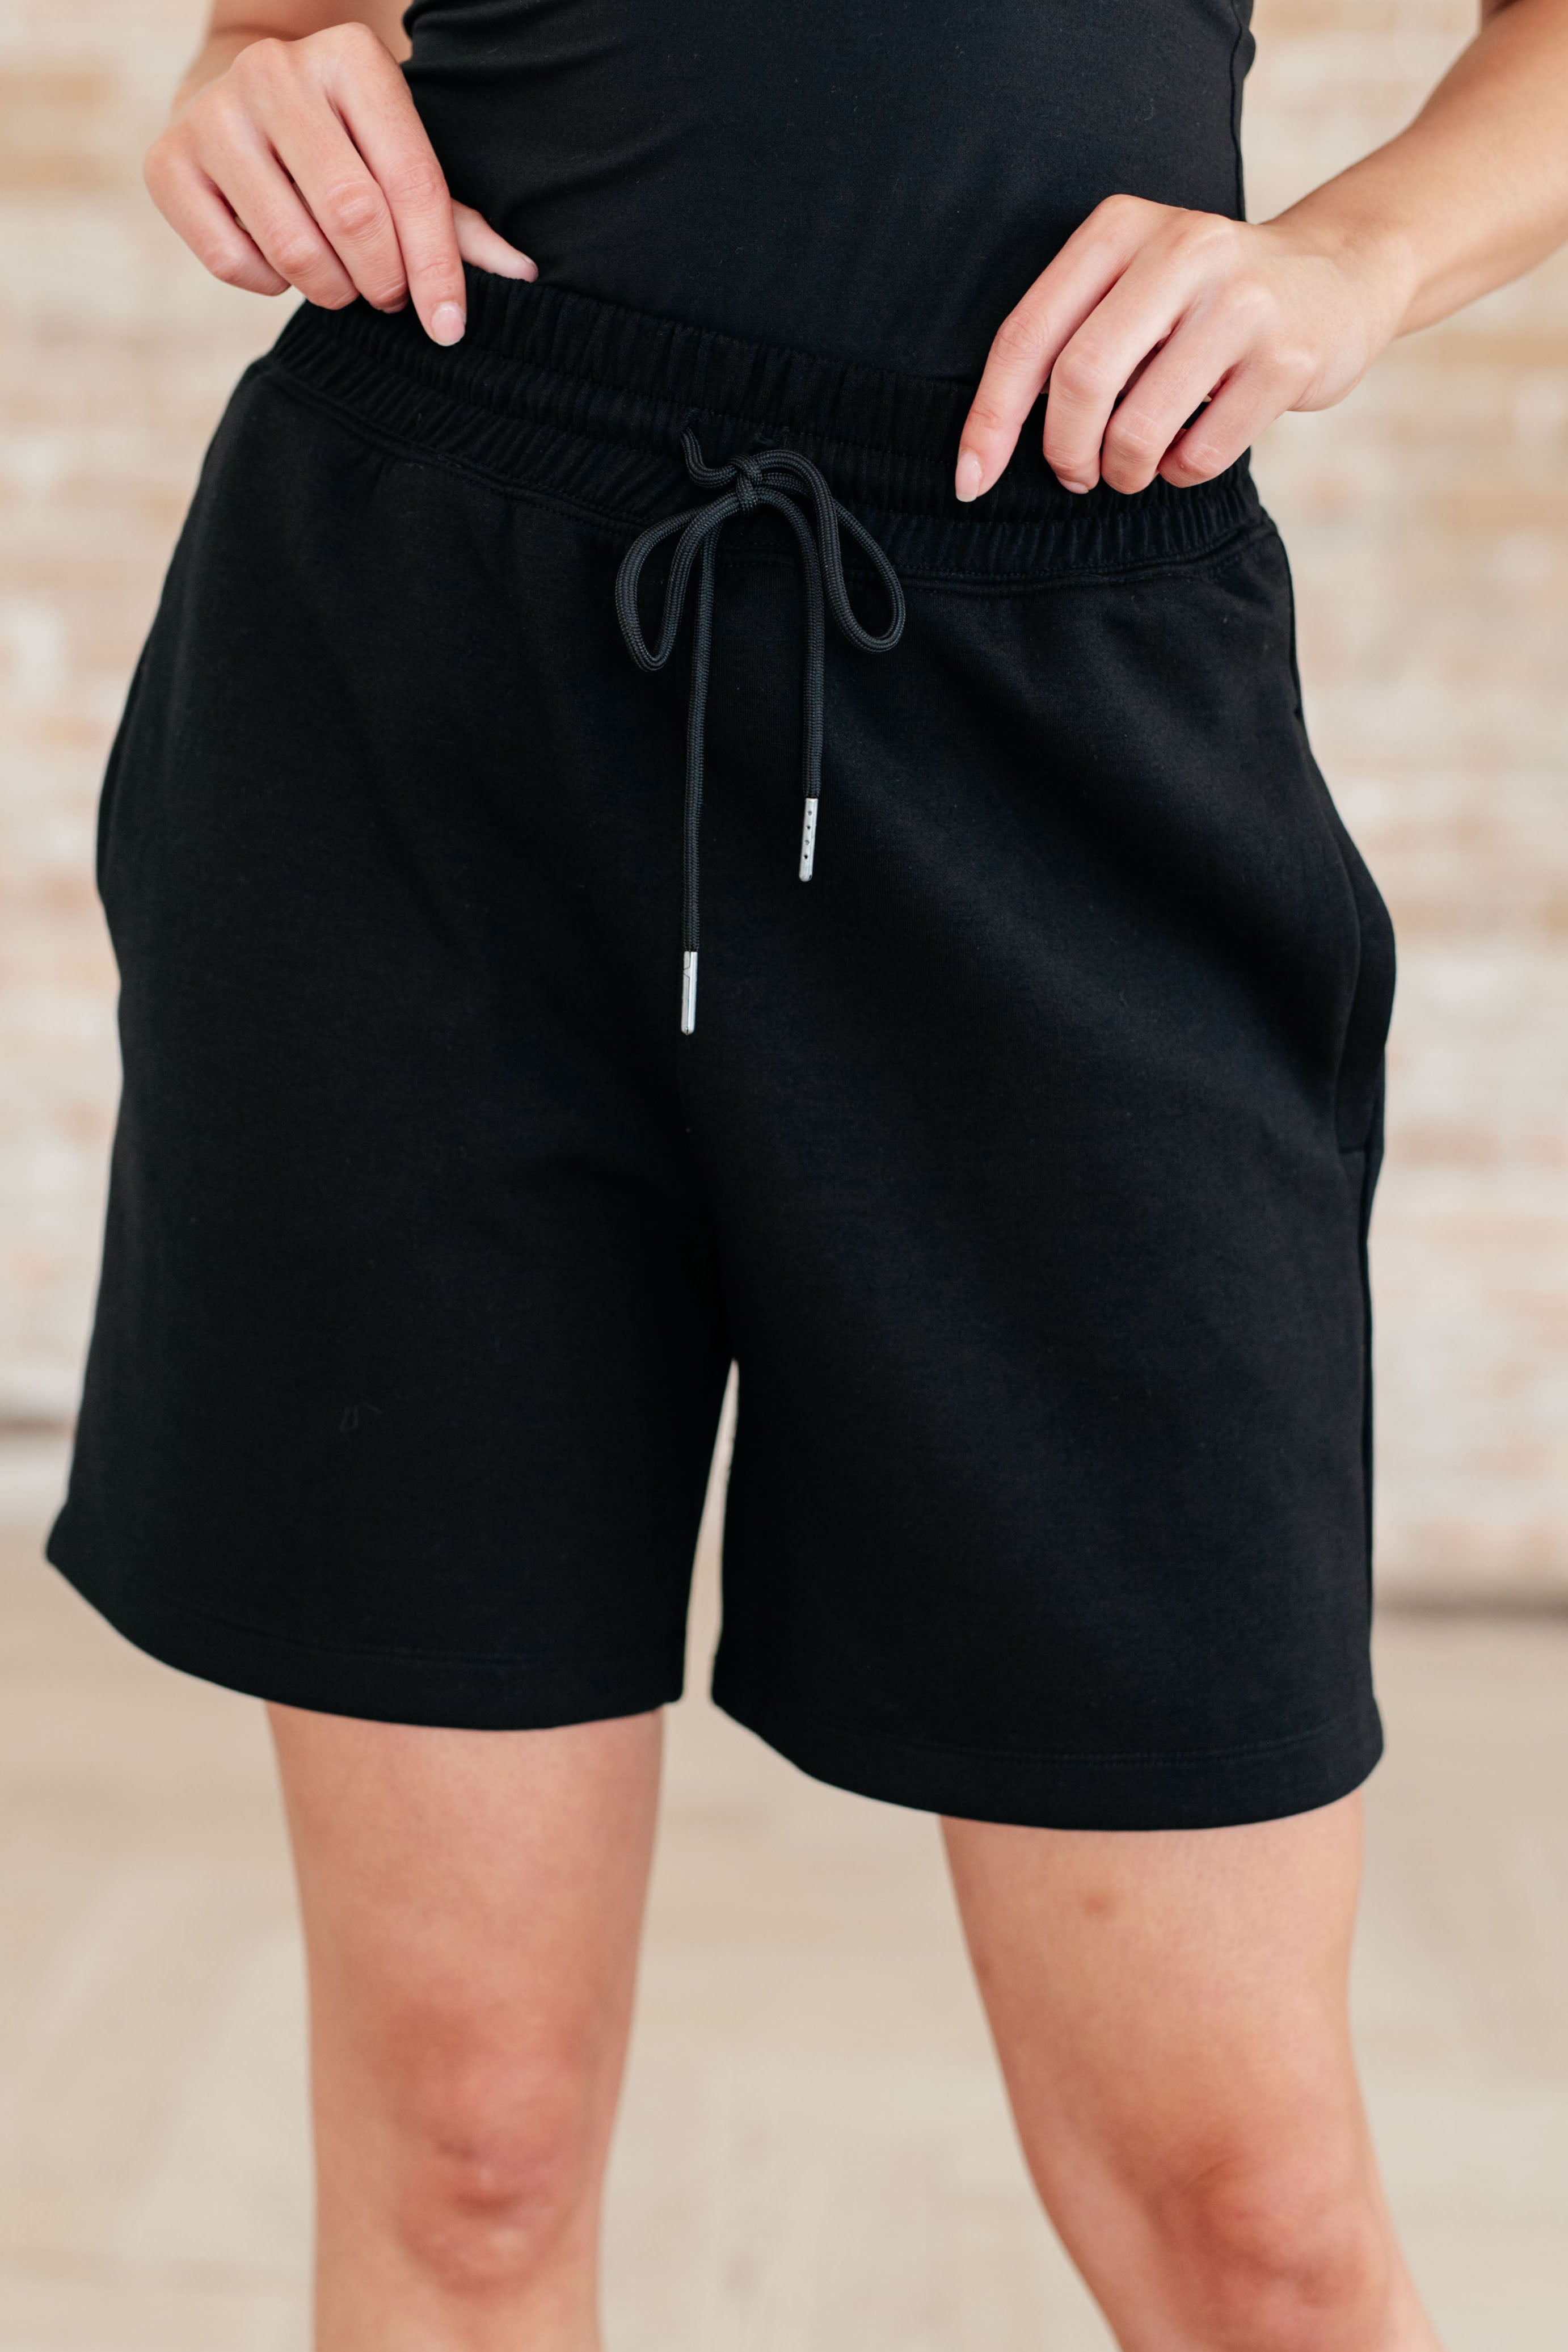 Settle In Dad Shorts in Black Athleisure Ave Shops   